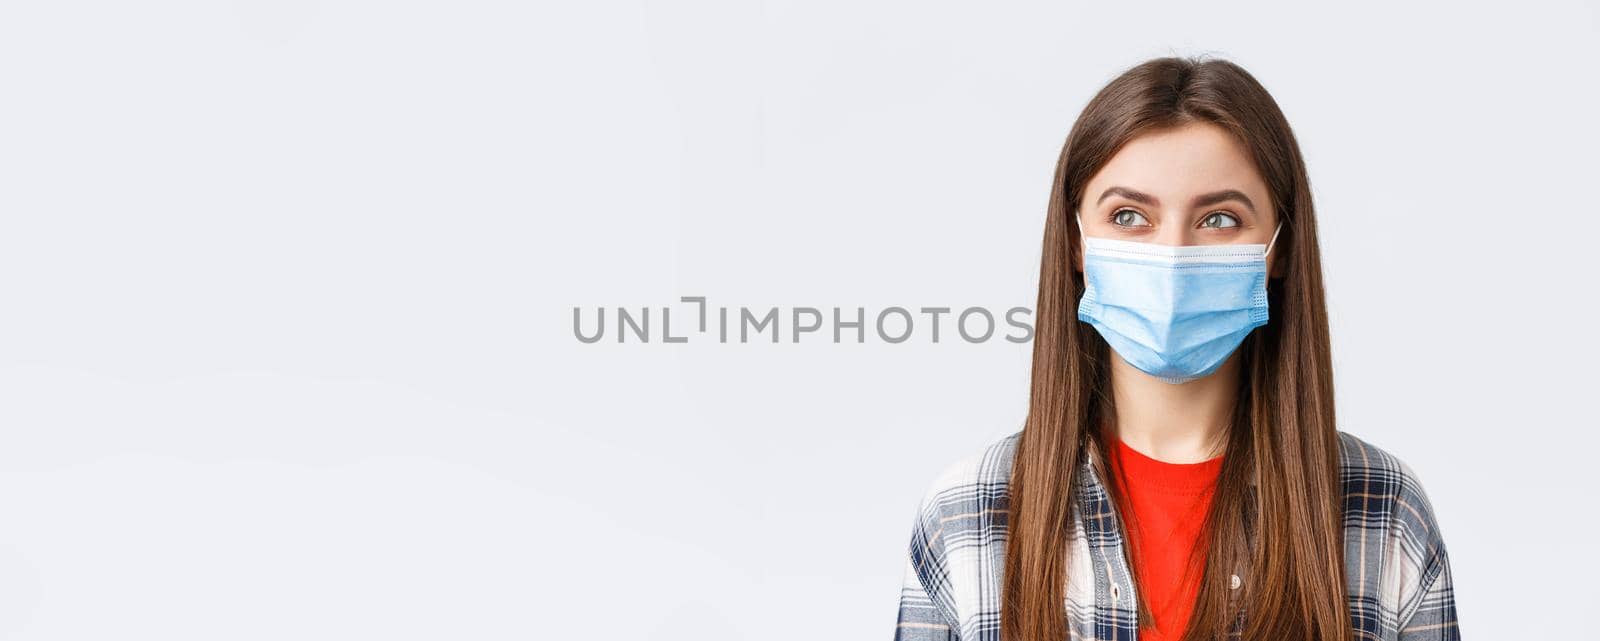 Coronavirus outbreak, leisure on quarantine, social distancing and emotions concept. Close-up of pleased cute girl smiling in medical mask, looking left at pleasant good thing, white background.